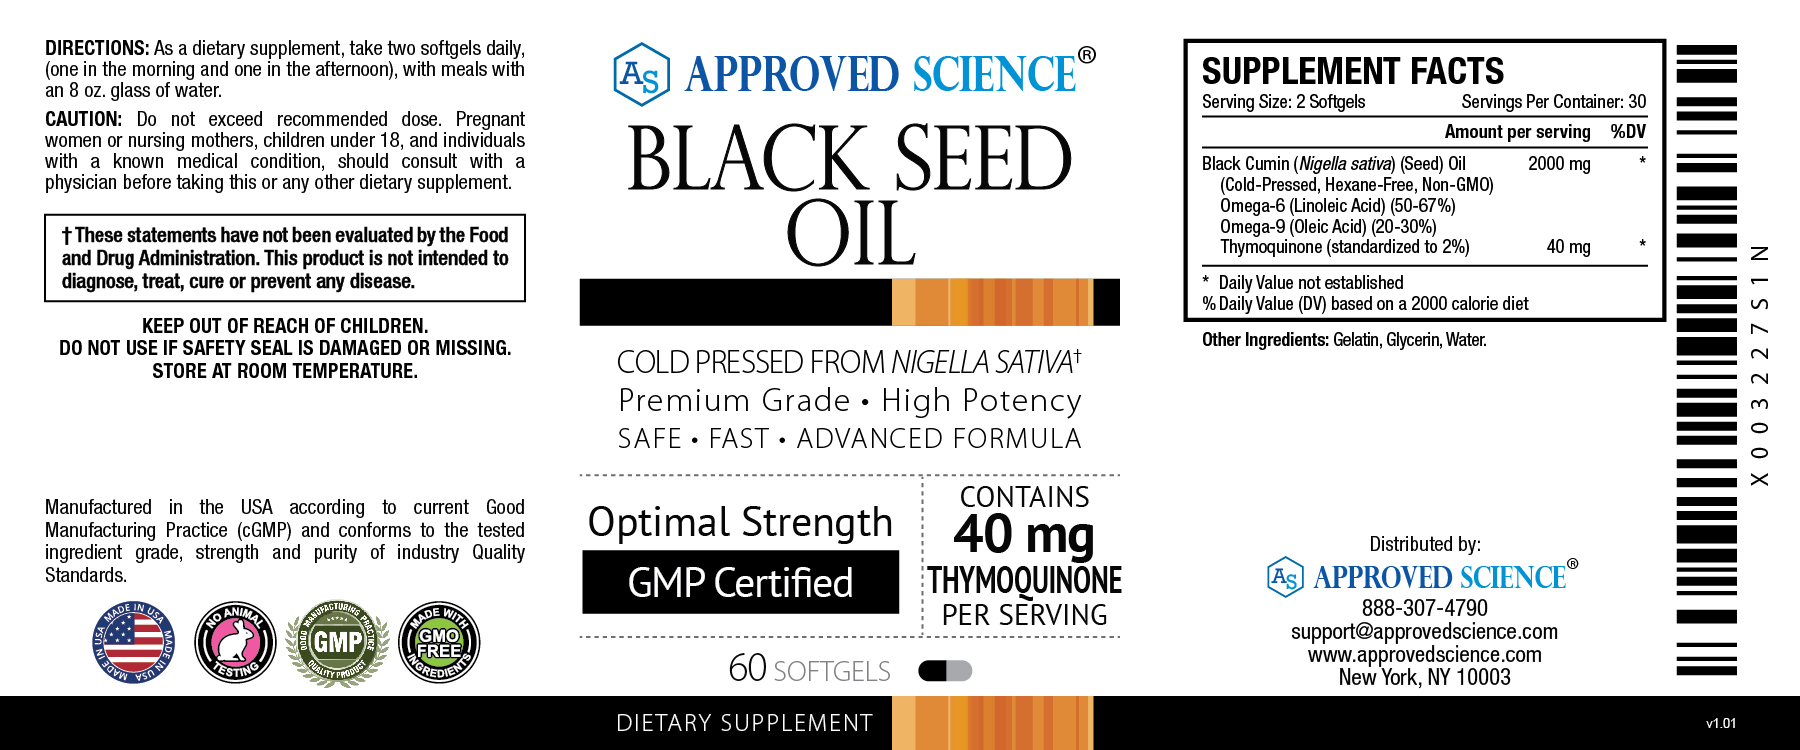 Approved Science® Black Seed Oil Supplement Facts